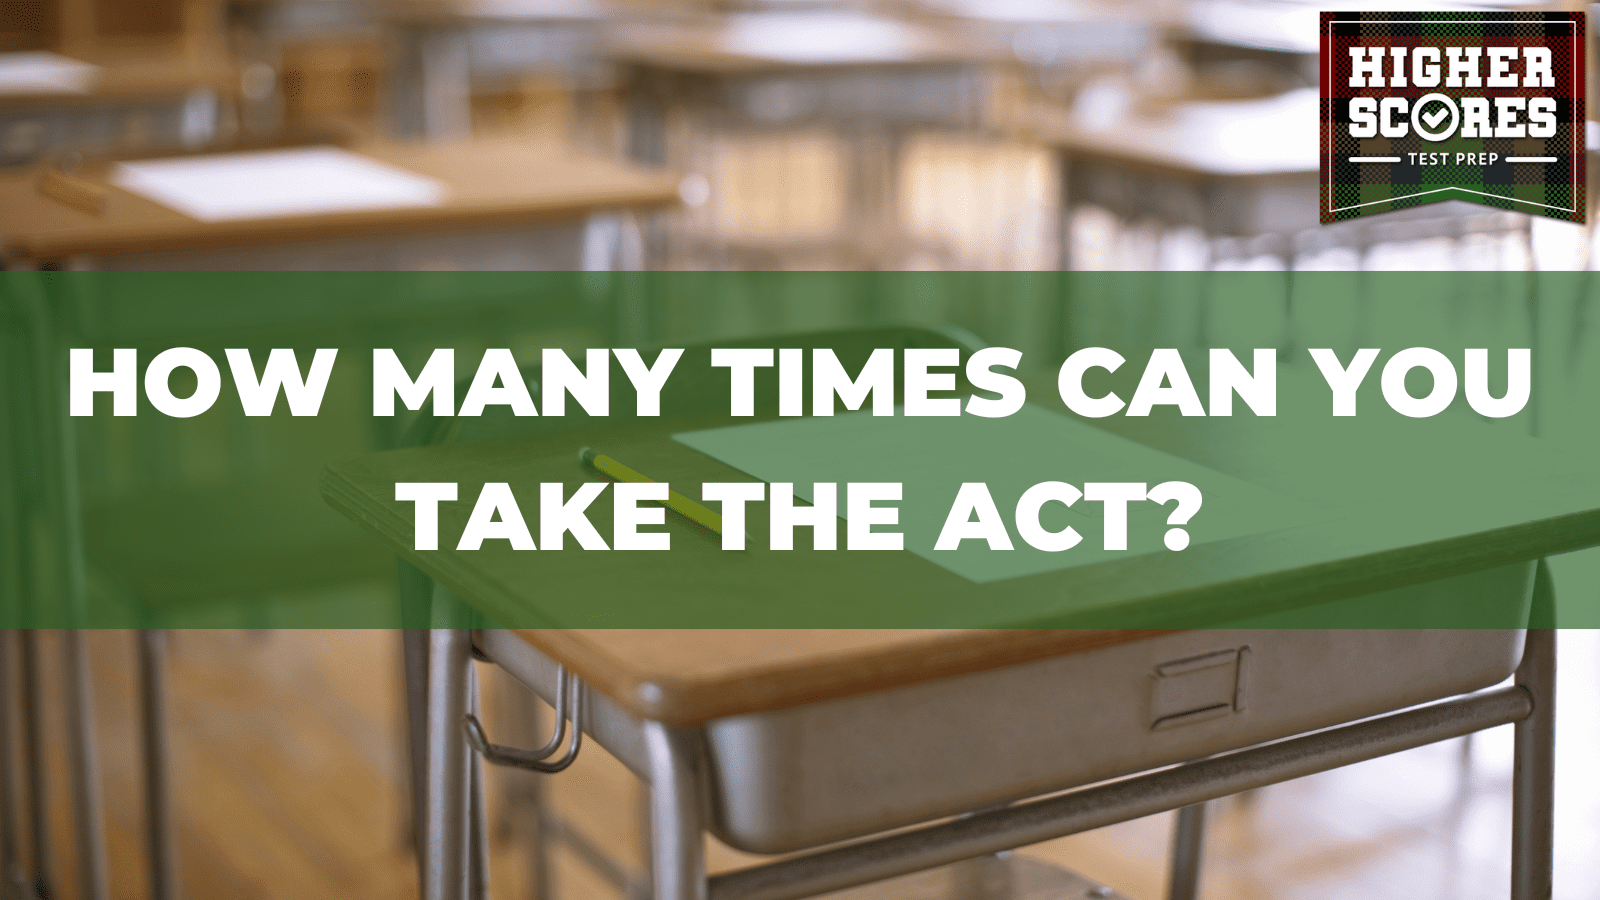 How Many Times Can You Take The ACT?